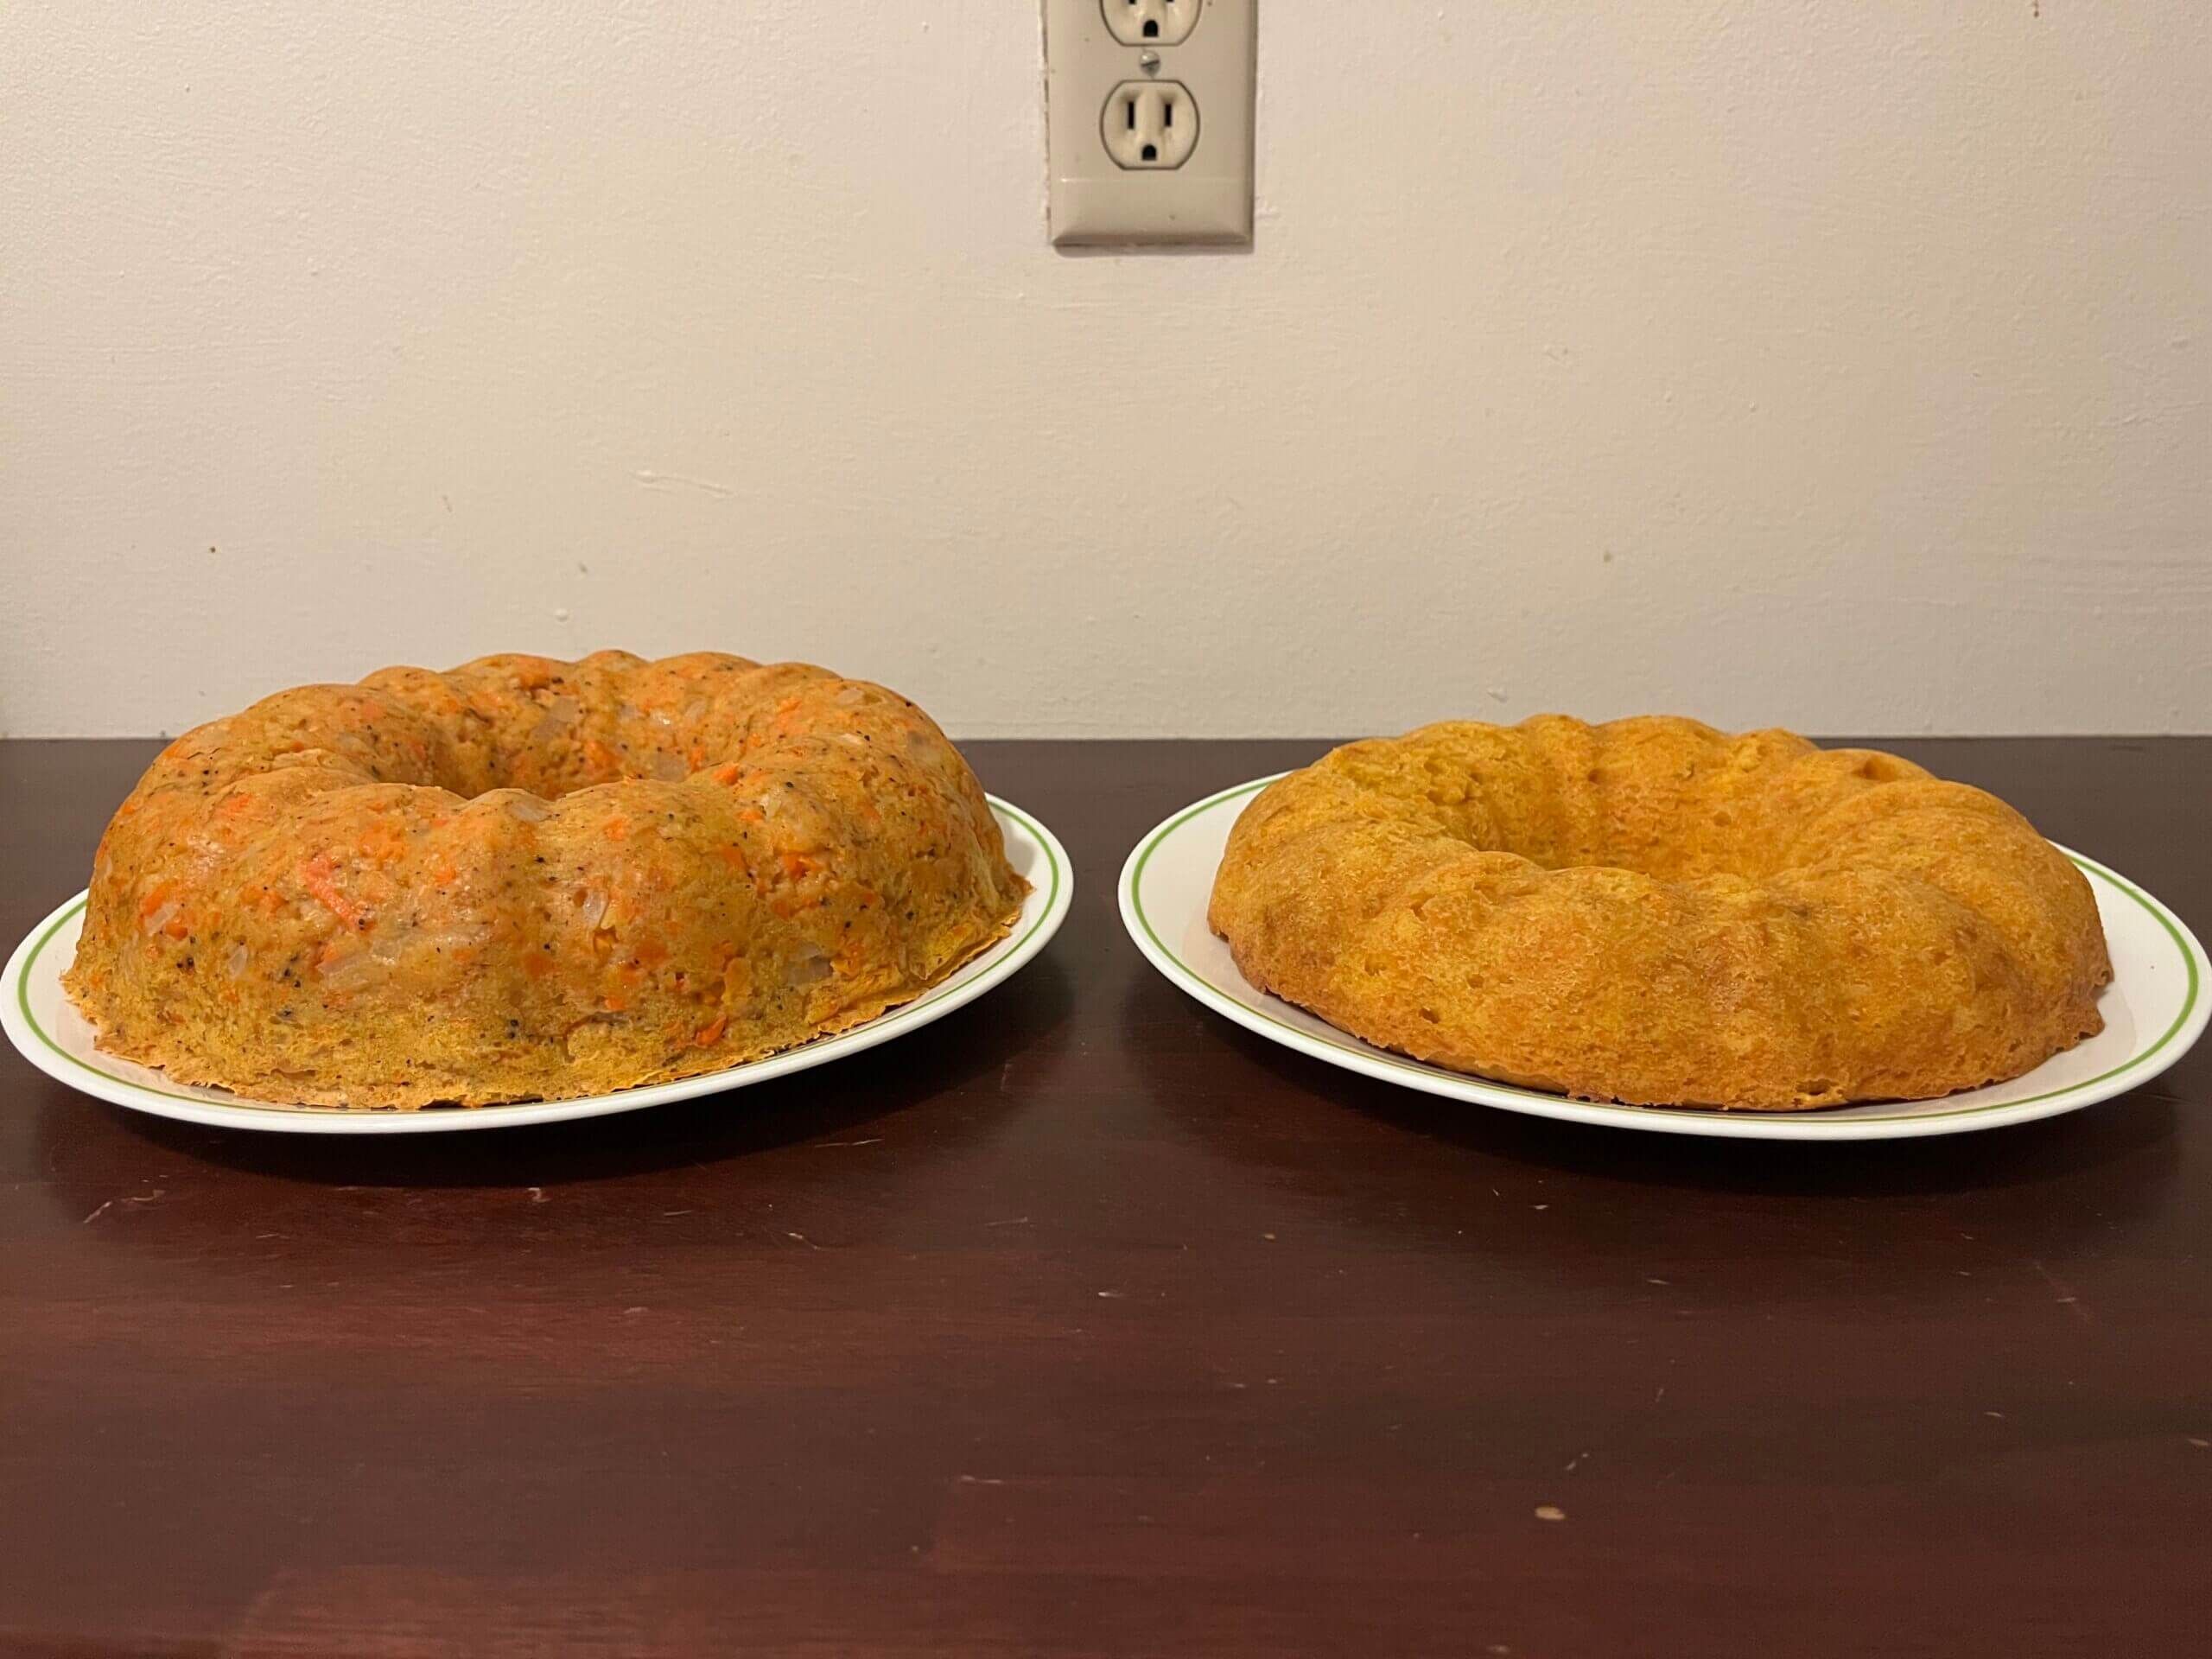 Two golden-orange bundt cakes sit side by side on white plates on a dark brown counter. The one on the left is taller than the one on the right.